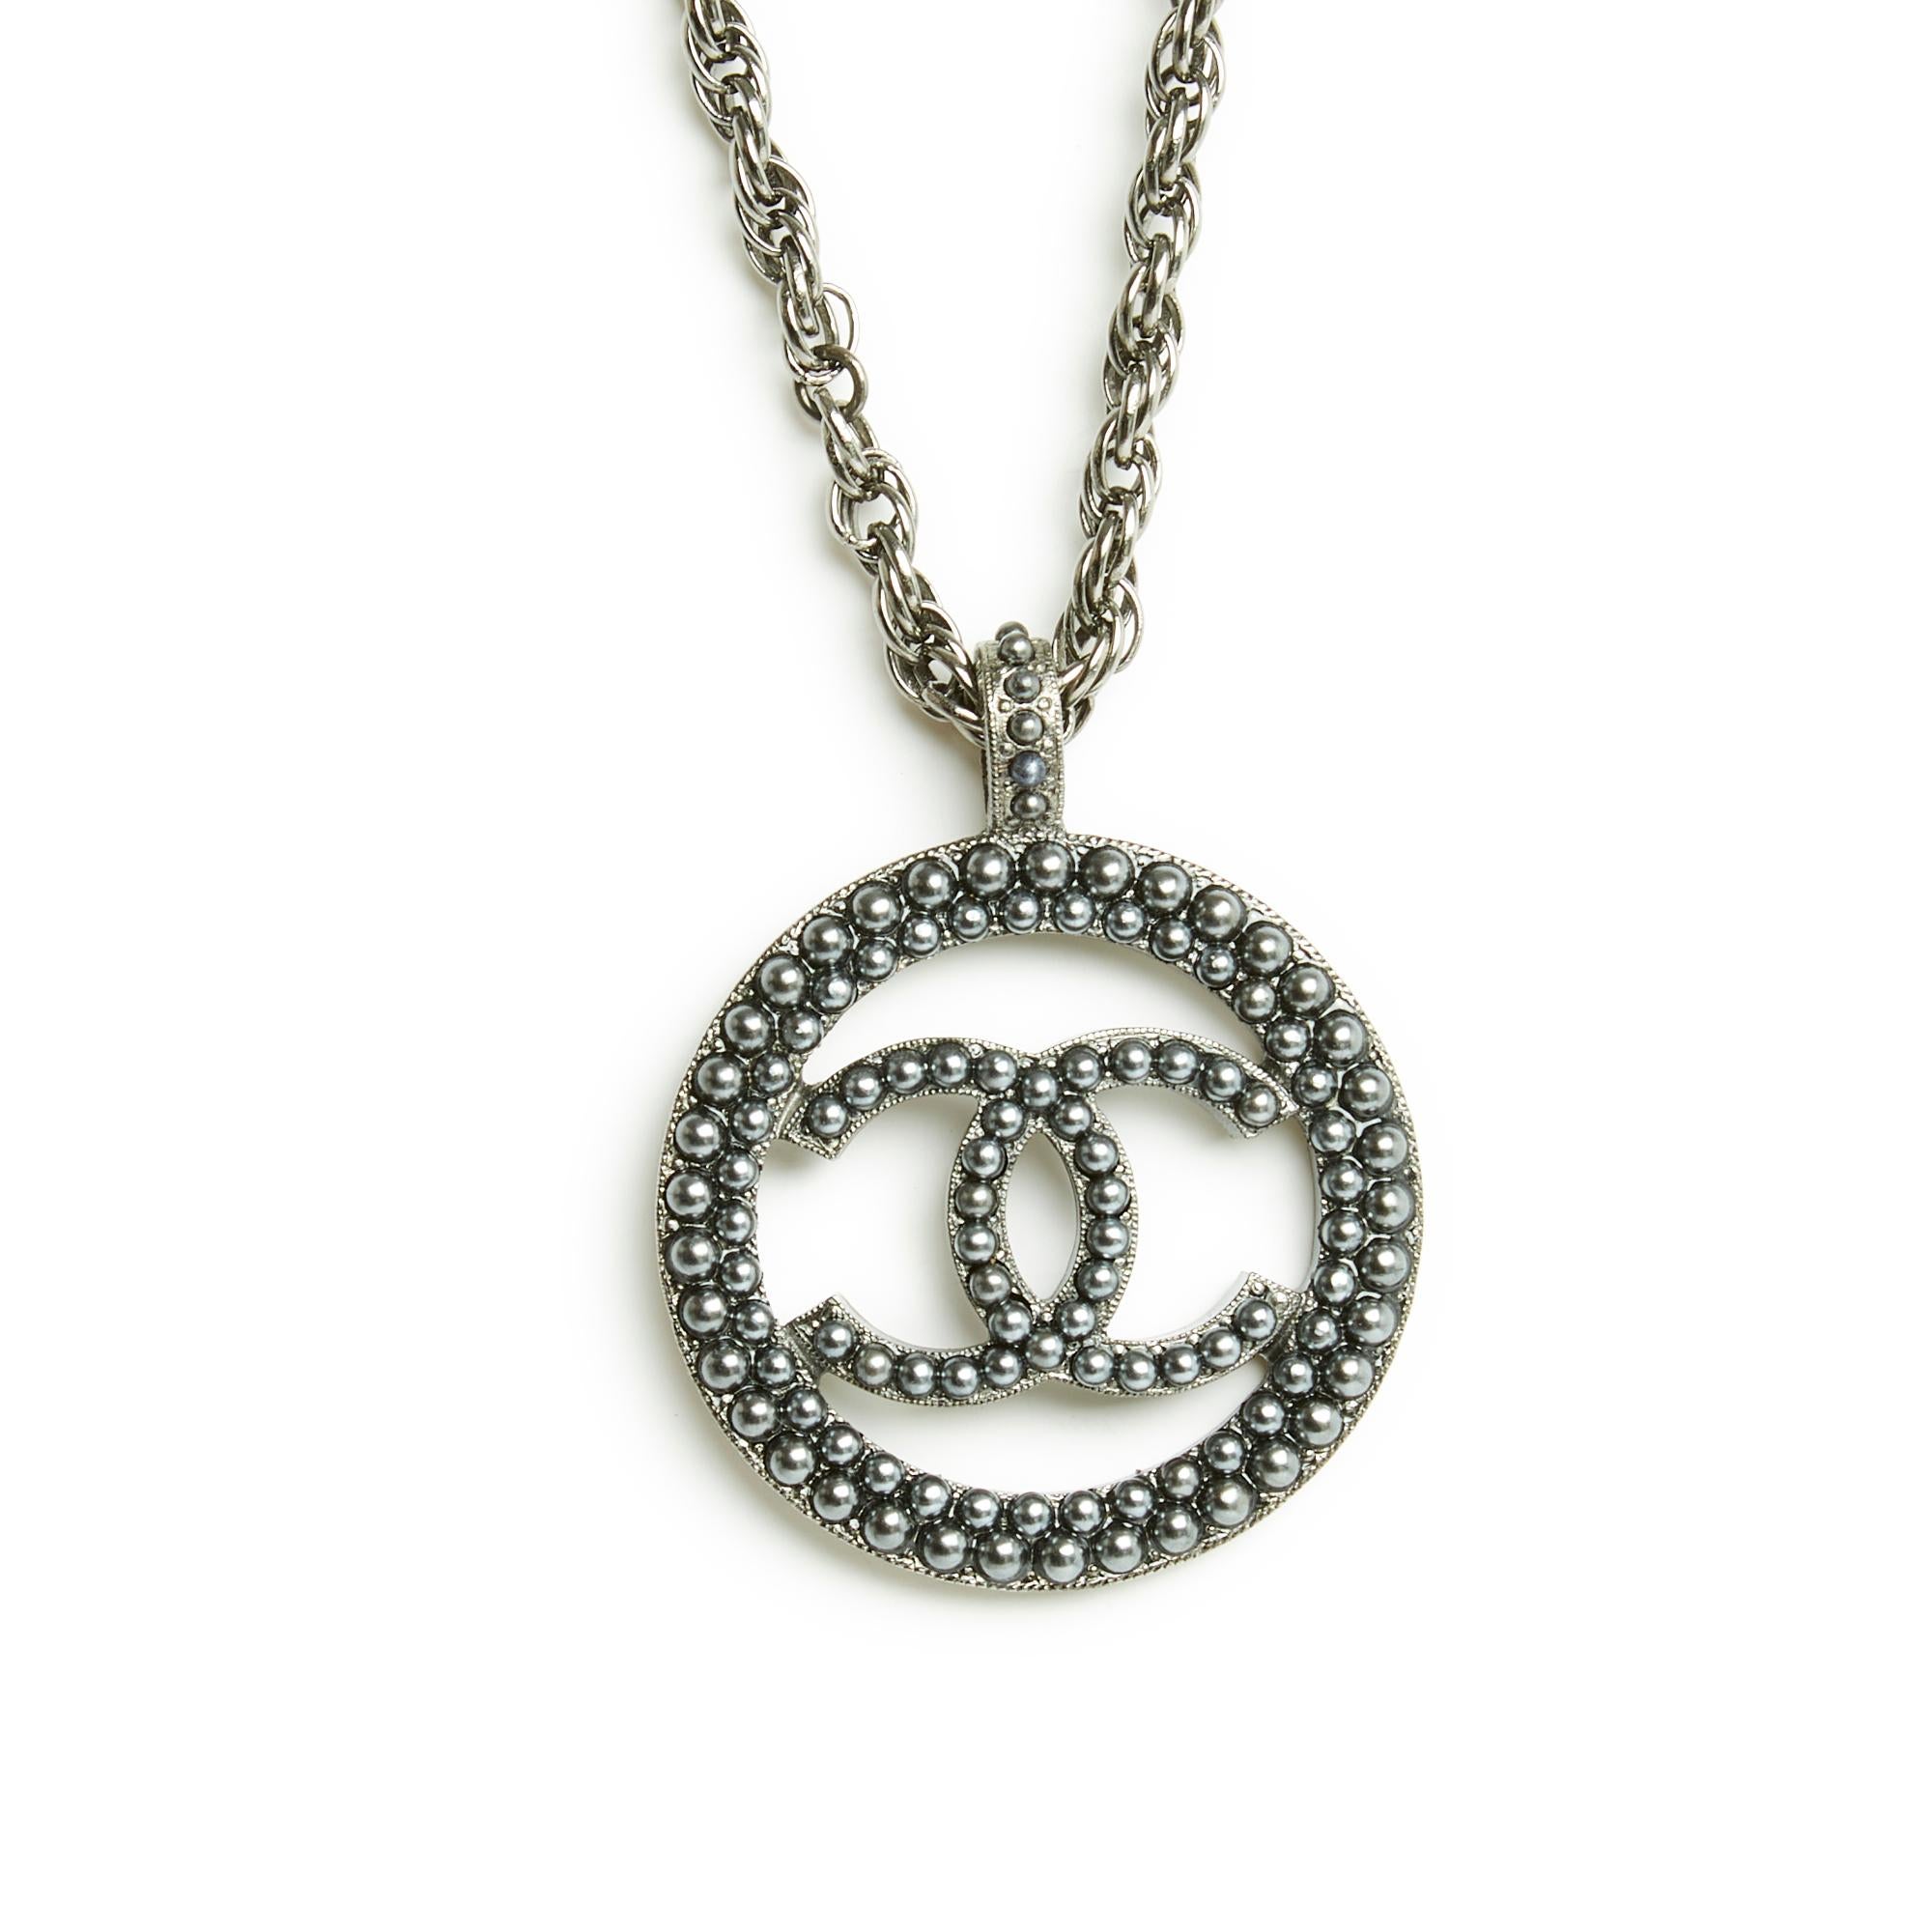 Chanel necklace Métiers d'Art collection at the Ritz or Pre Fall 2017 mid-length in blackened silver metal, composed of a cable knit chain and a large CC medallion inlaid with coordinated micro pearls, closure with a carabiner on a ring and its CC